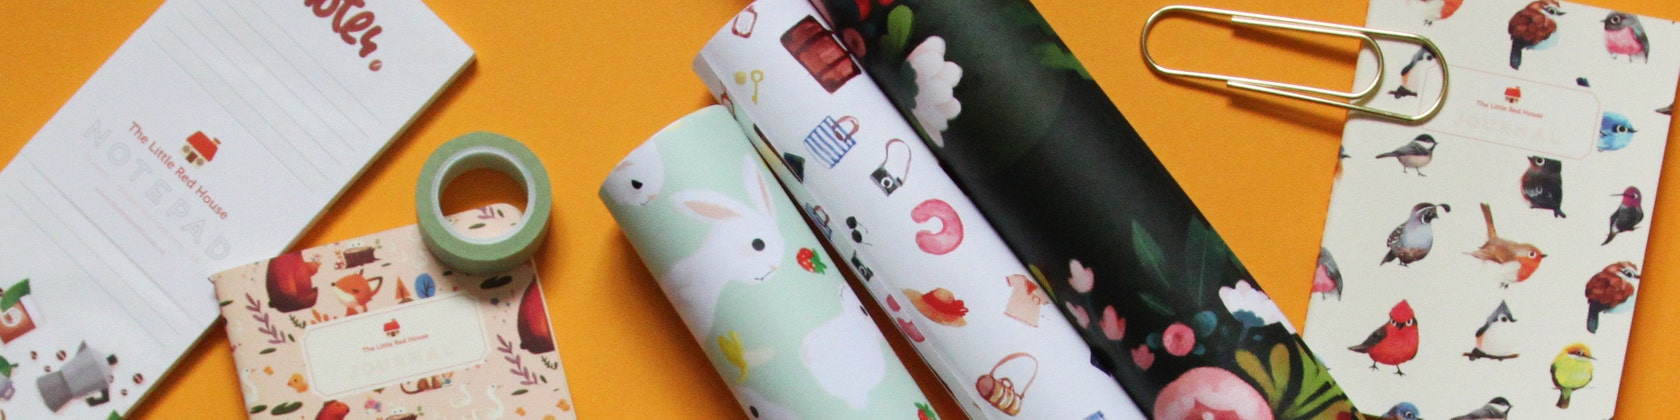 Cat Faces - Washi Tape - The Little Red House